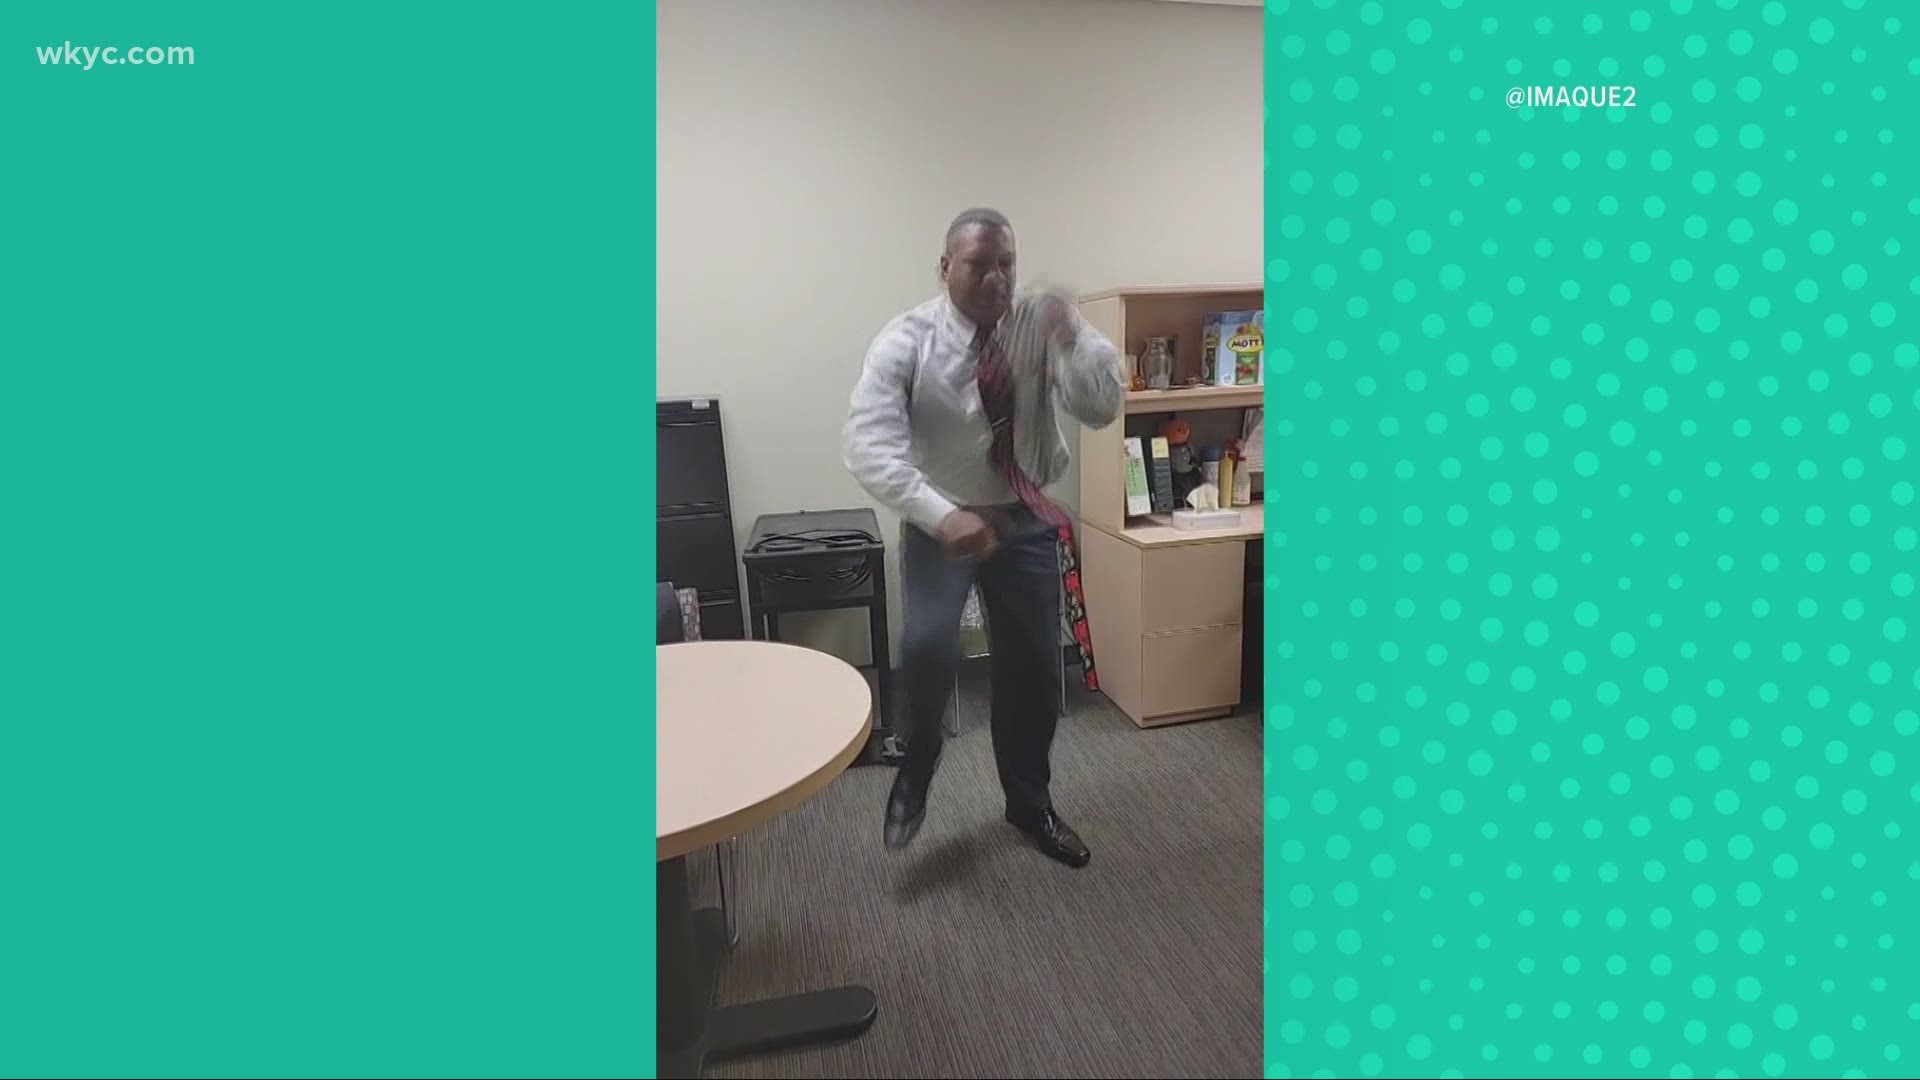 Check out tonight's 'Worth the Watch.'  A TikTok user posted this video of him dancing to everybody now at work.